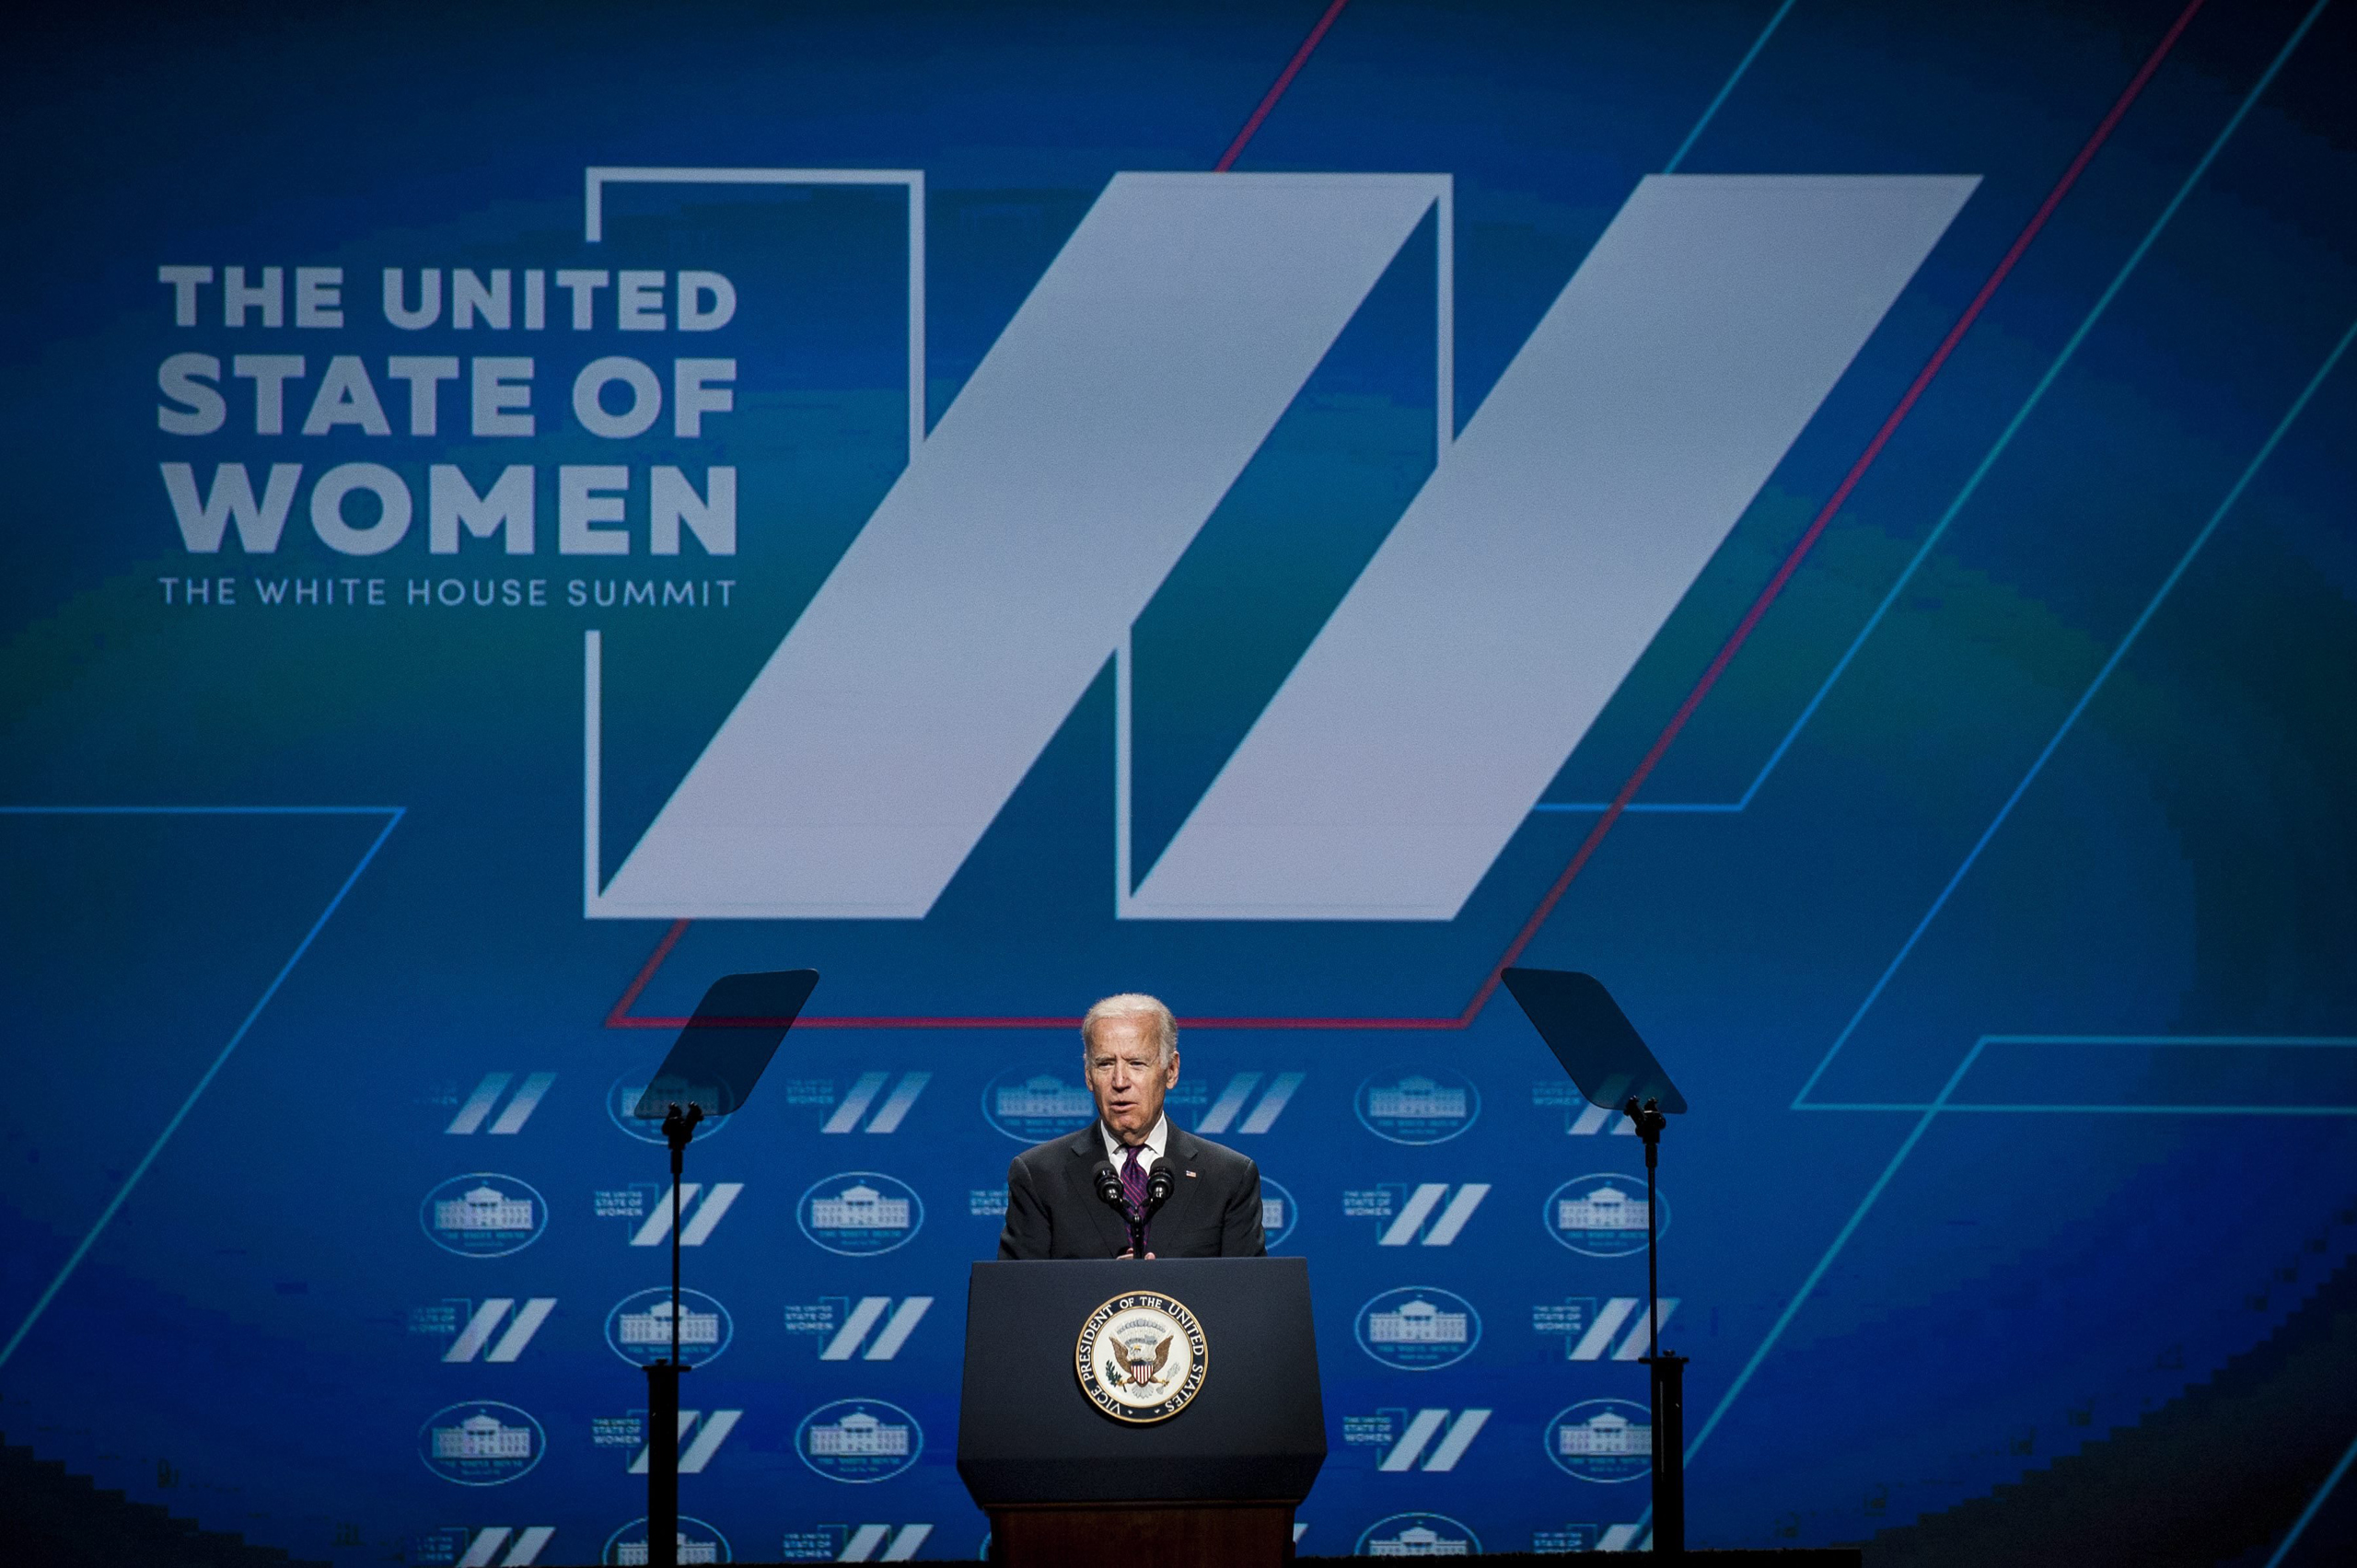 Vice President Joe Biden delivers remarks at the inaugural 'White House United State of Women Summit' at the Walter E. Washington Convention Center in Washington, D.C. on June 14, 2016. (Pete Marovich—EPA)